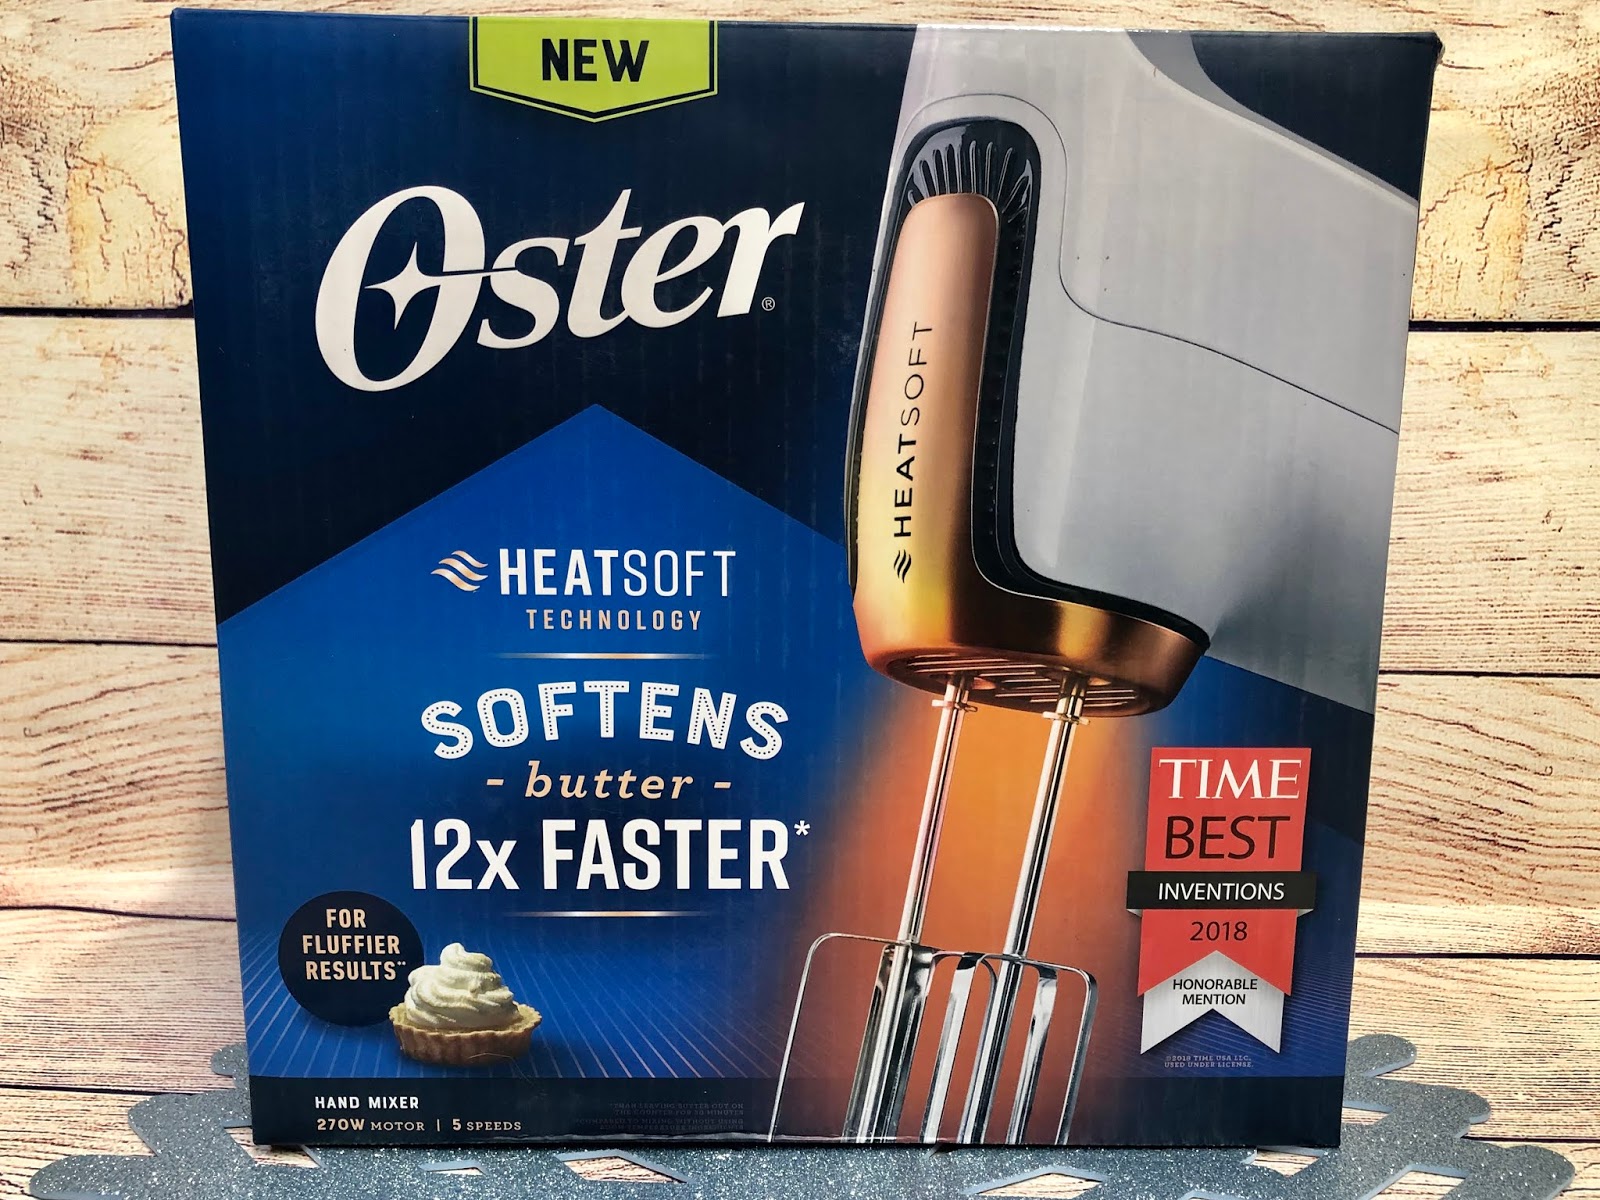 Best Inventions 2018: Oster Has an Honorable Mention